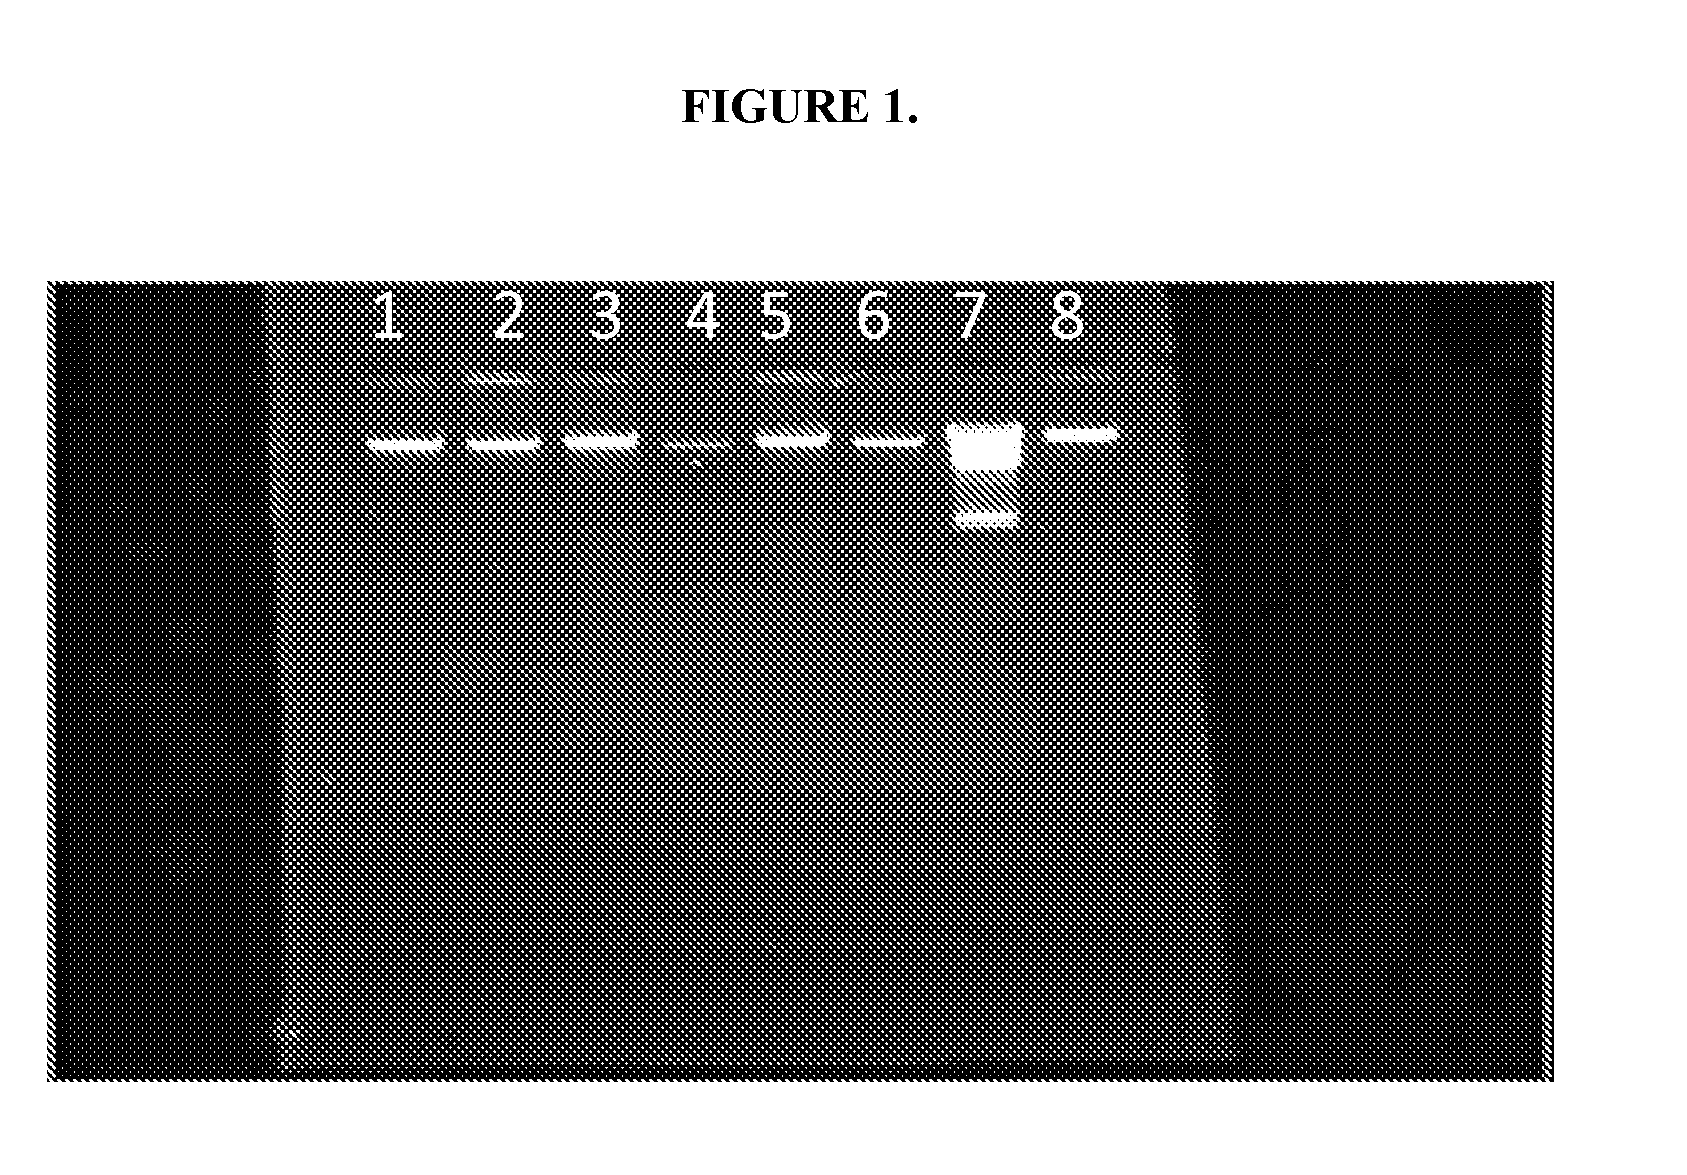 Method for nucleic acids isolation